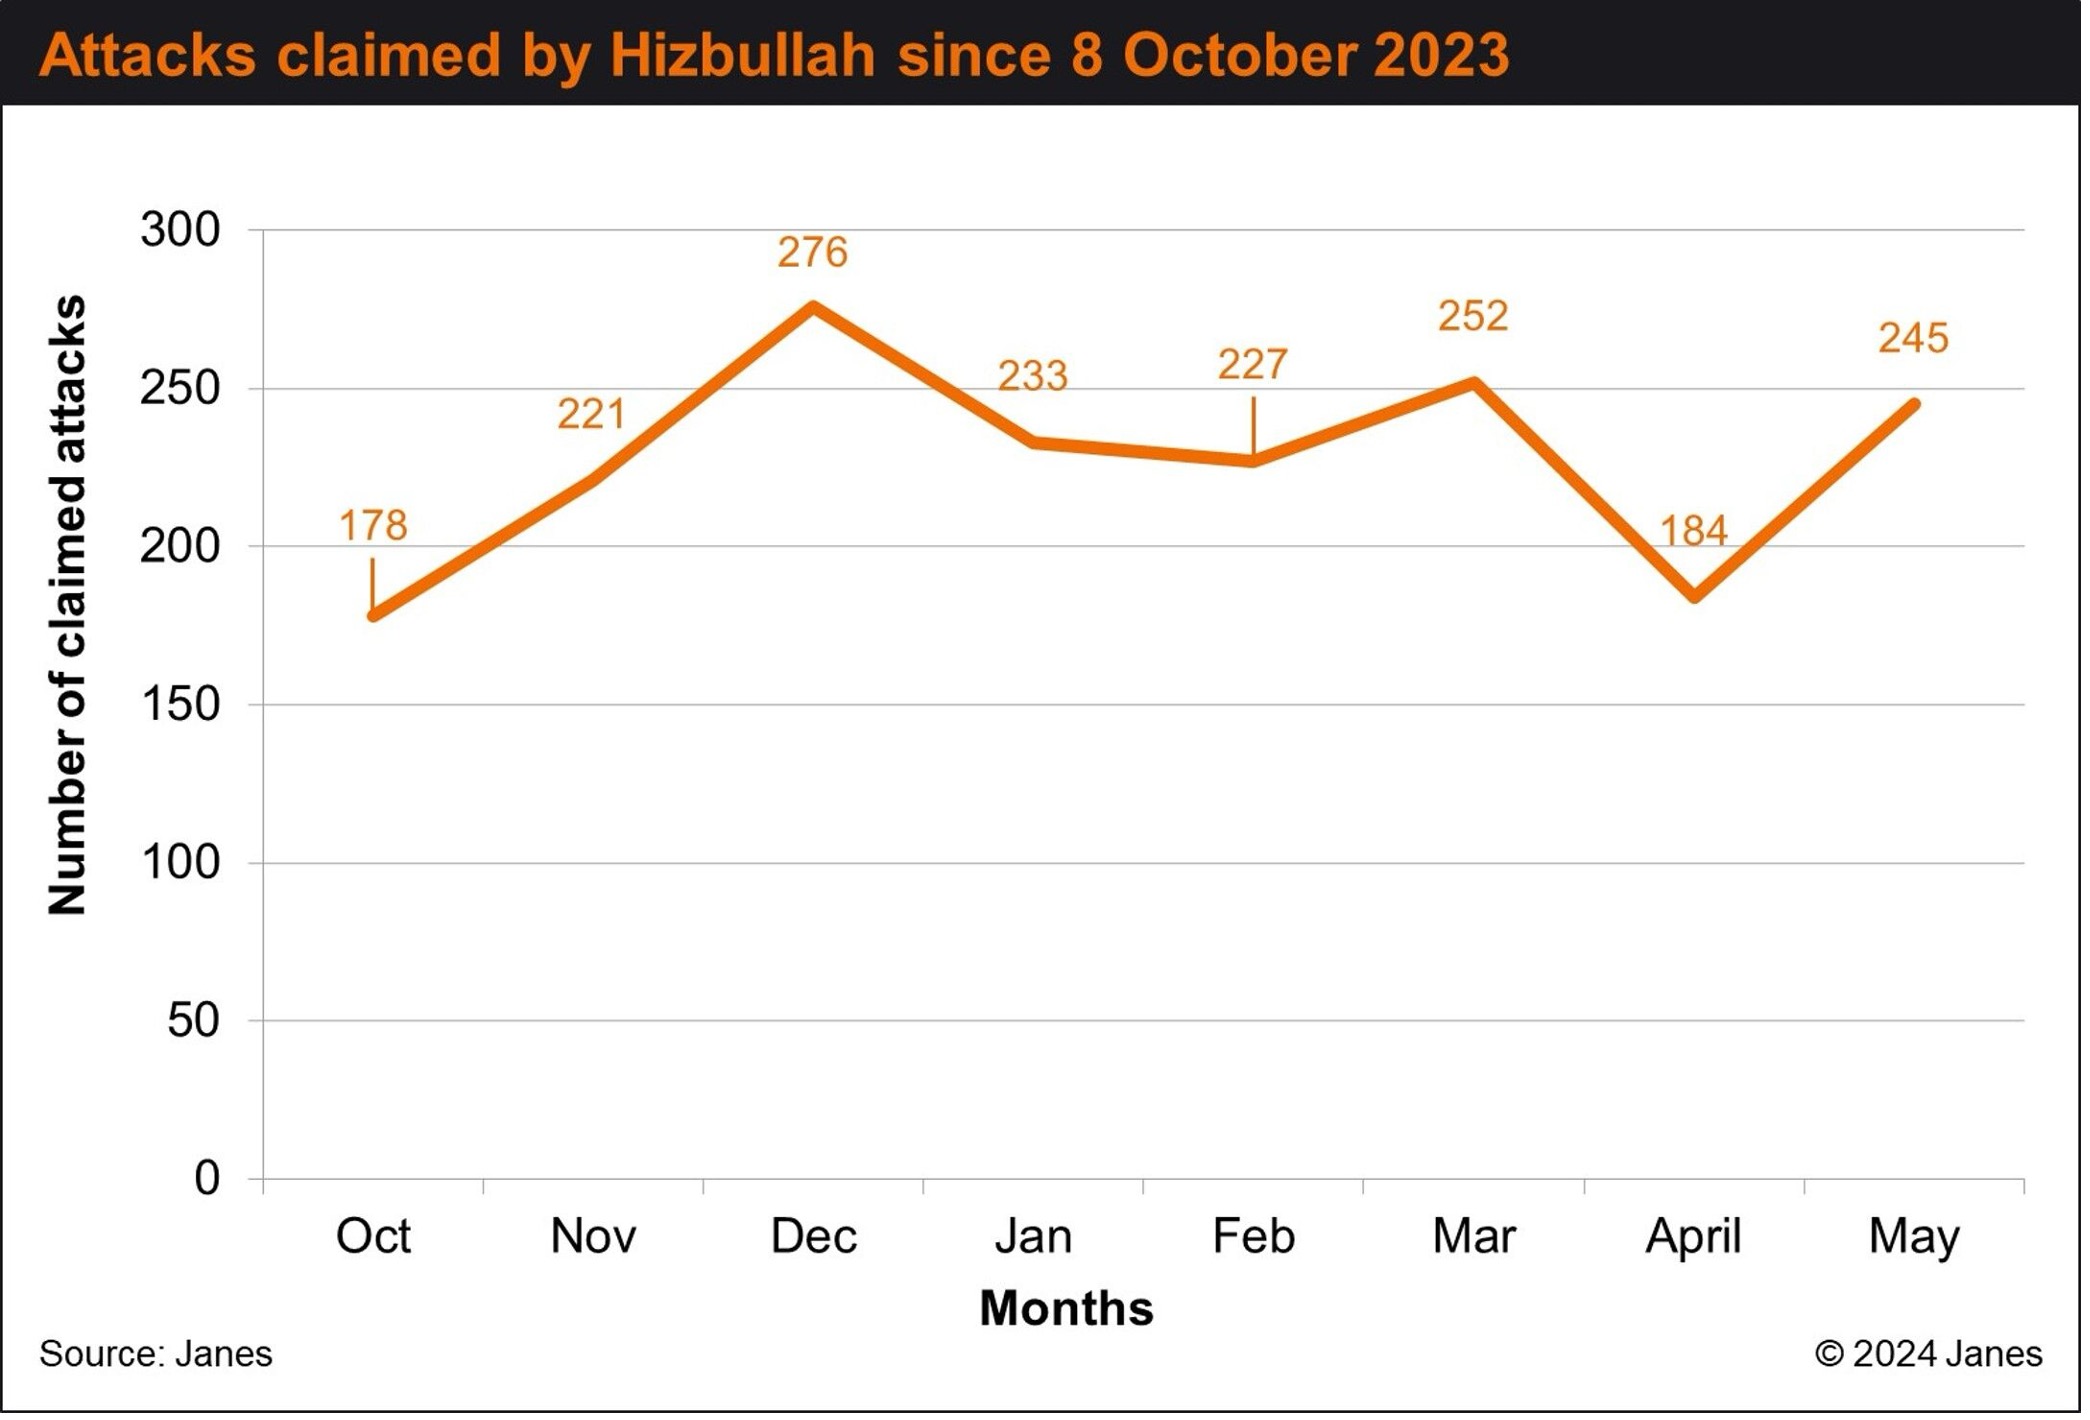 Attacks claimed by Hizbullah against Israel, October 2023 to May 2024. (Janes)